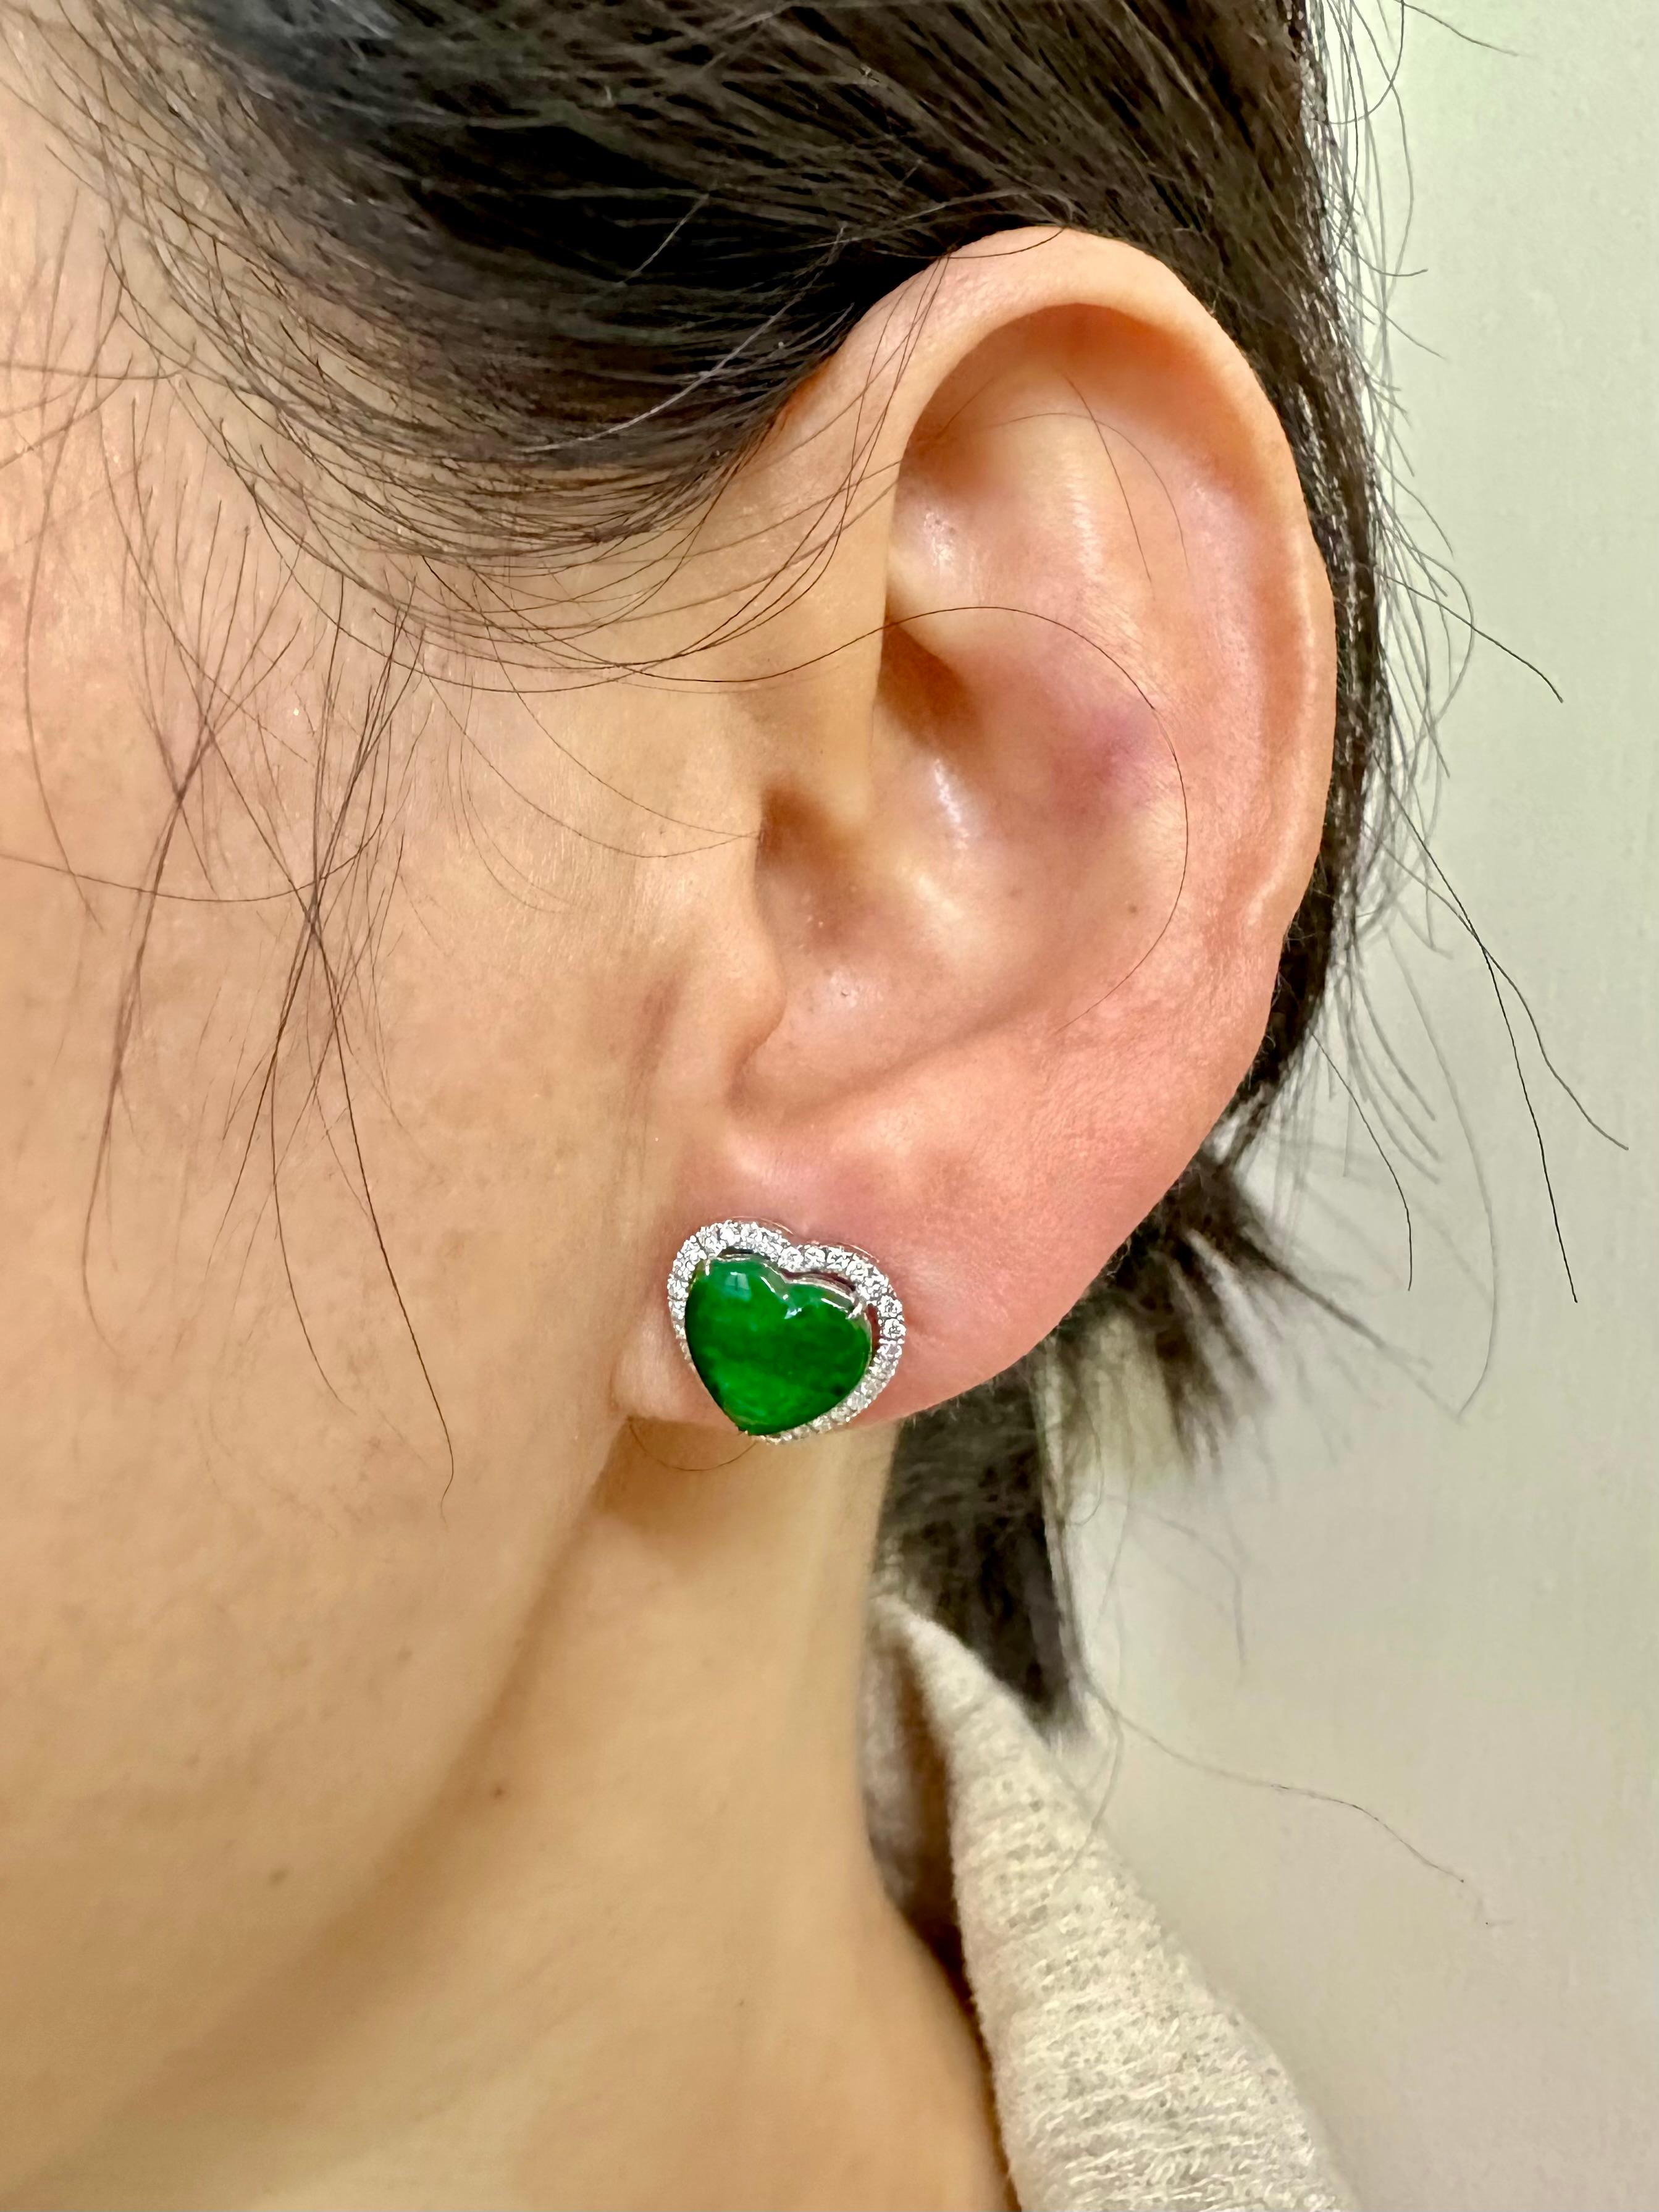 Please check out the HD video! These earrings are out of this world. The natural jade glow under normal light and super glow under sun light or strong light! Here is a nice pair imperial Jade earrings with patches of deep and vivid green. In the